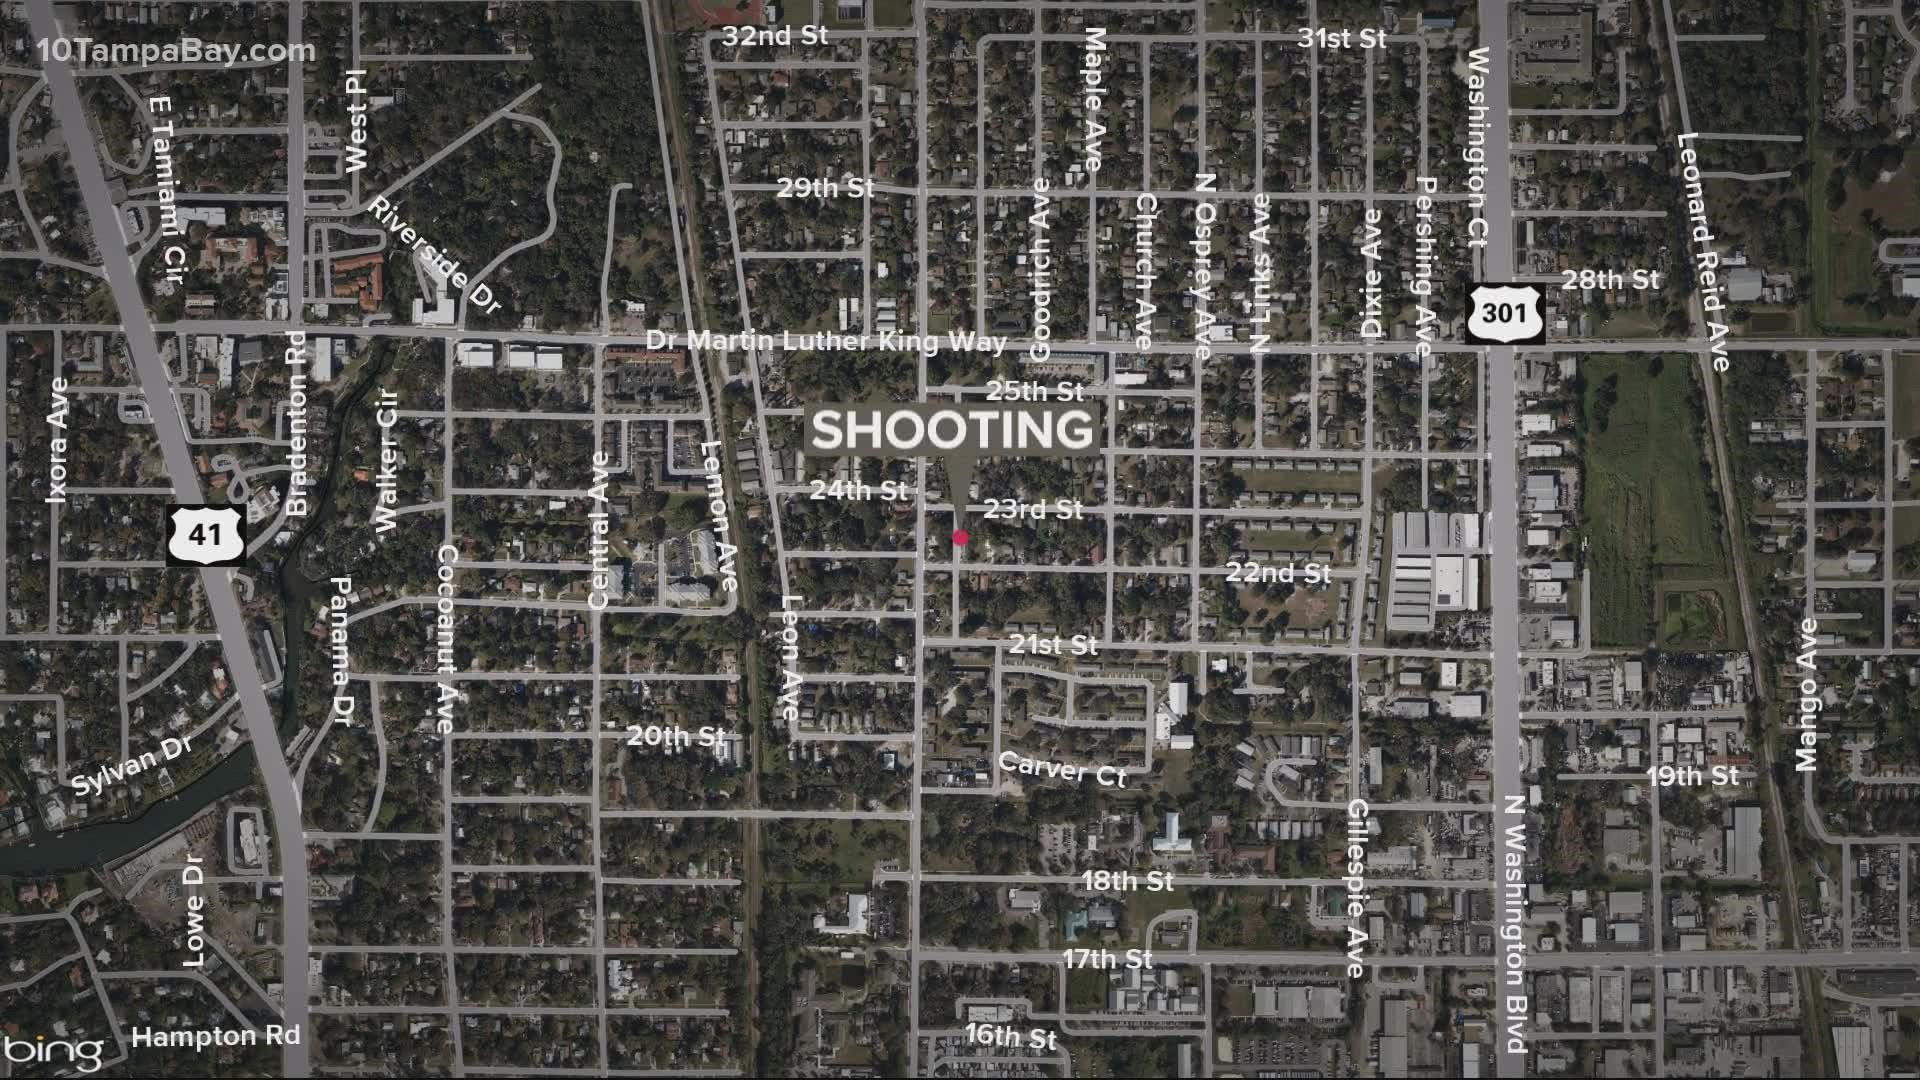 A 16-year-old was arrested following the Sunday shooting in the area of Palmadelia Avenue and 22nd Street.